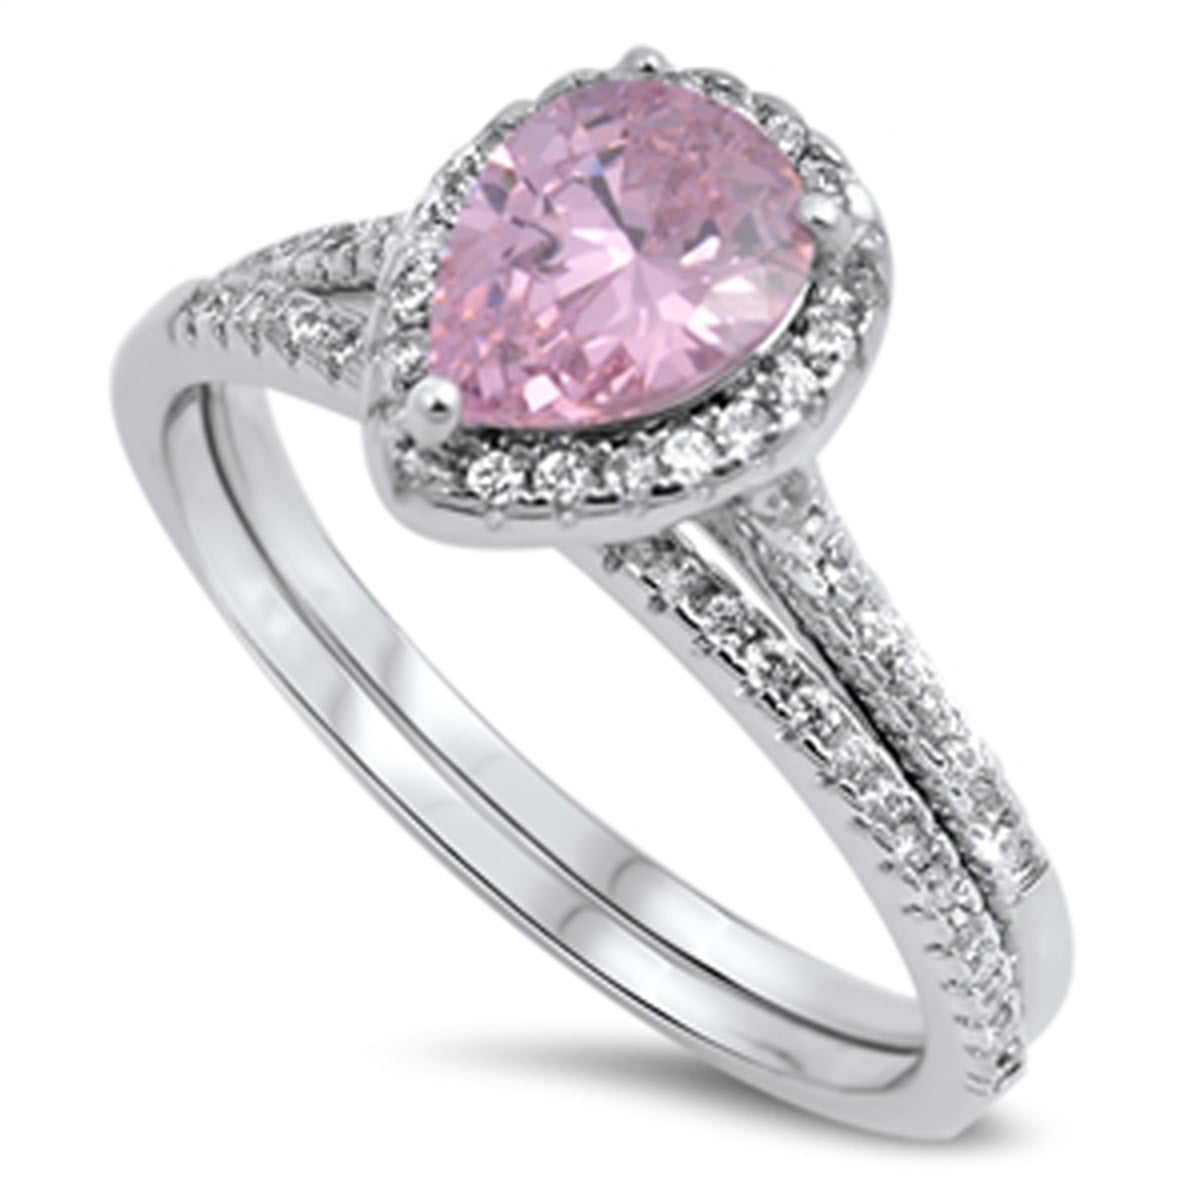 Women Created Pink Sapphire Sterling Silver Wedding Bridal Ring Set Size 5-10 